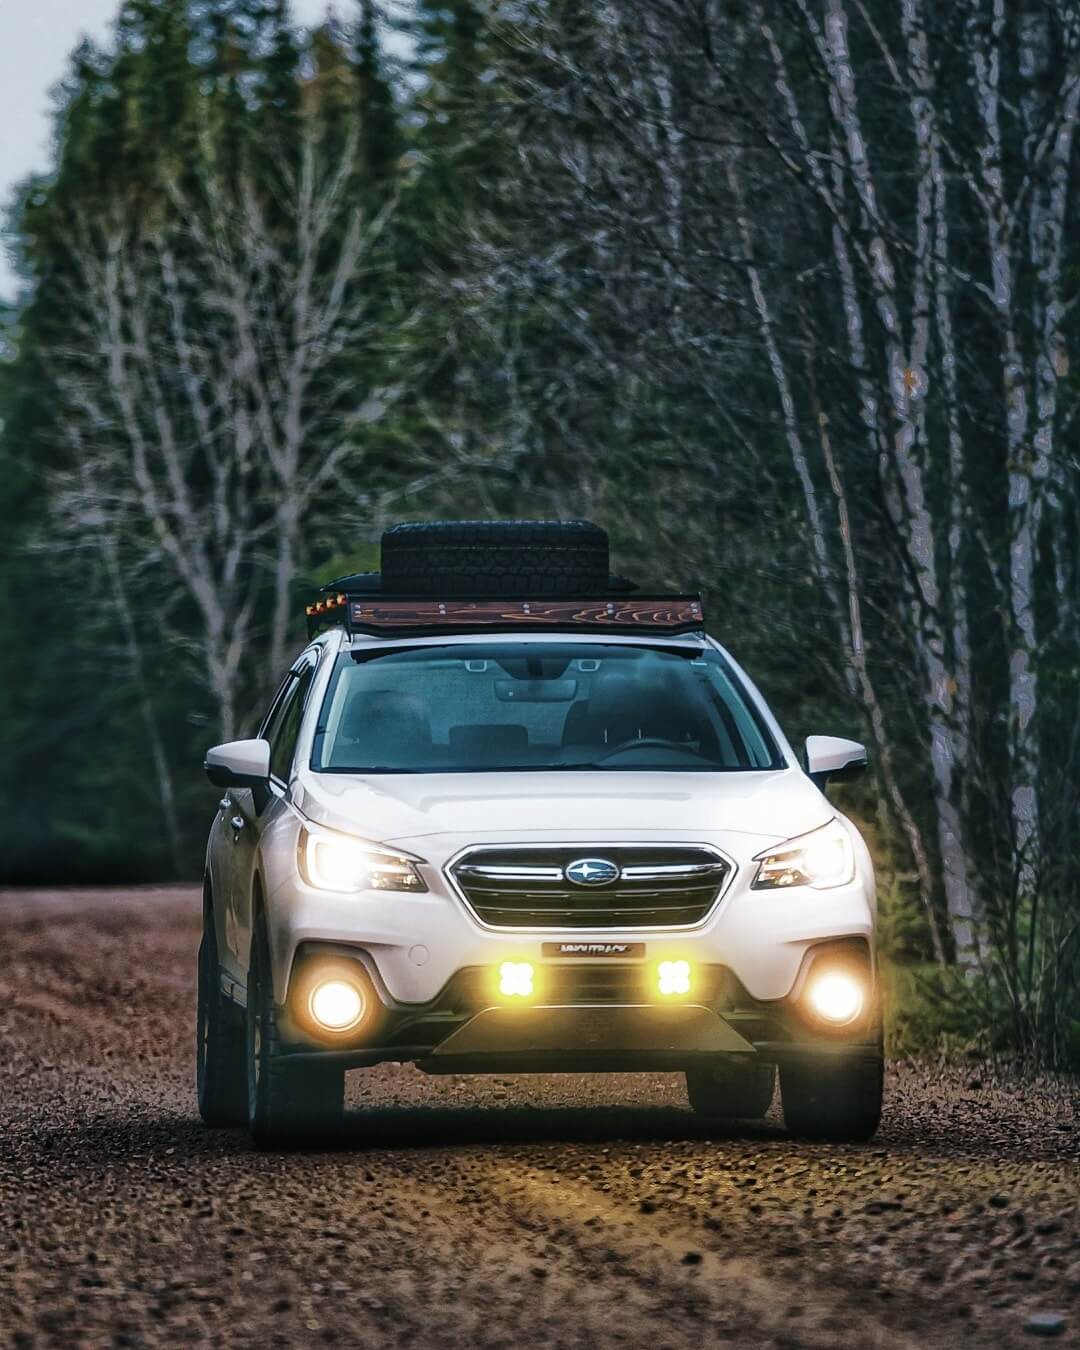 Subaru Outback driving in the forest